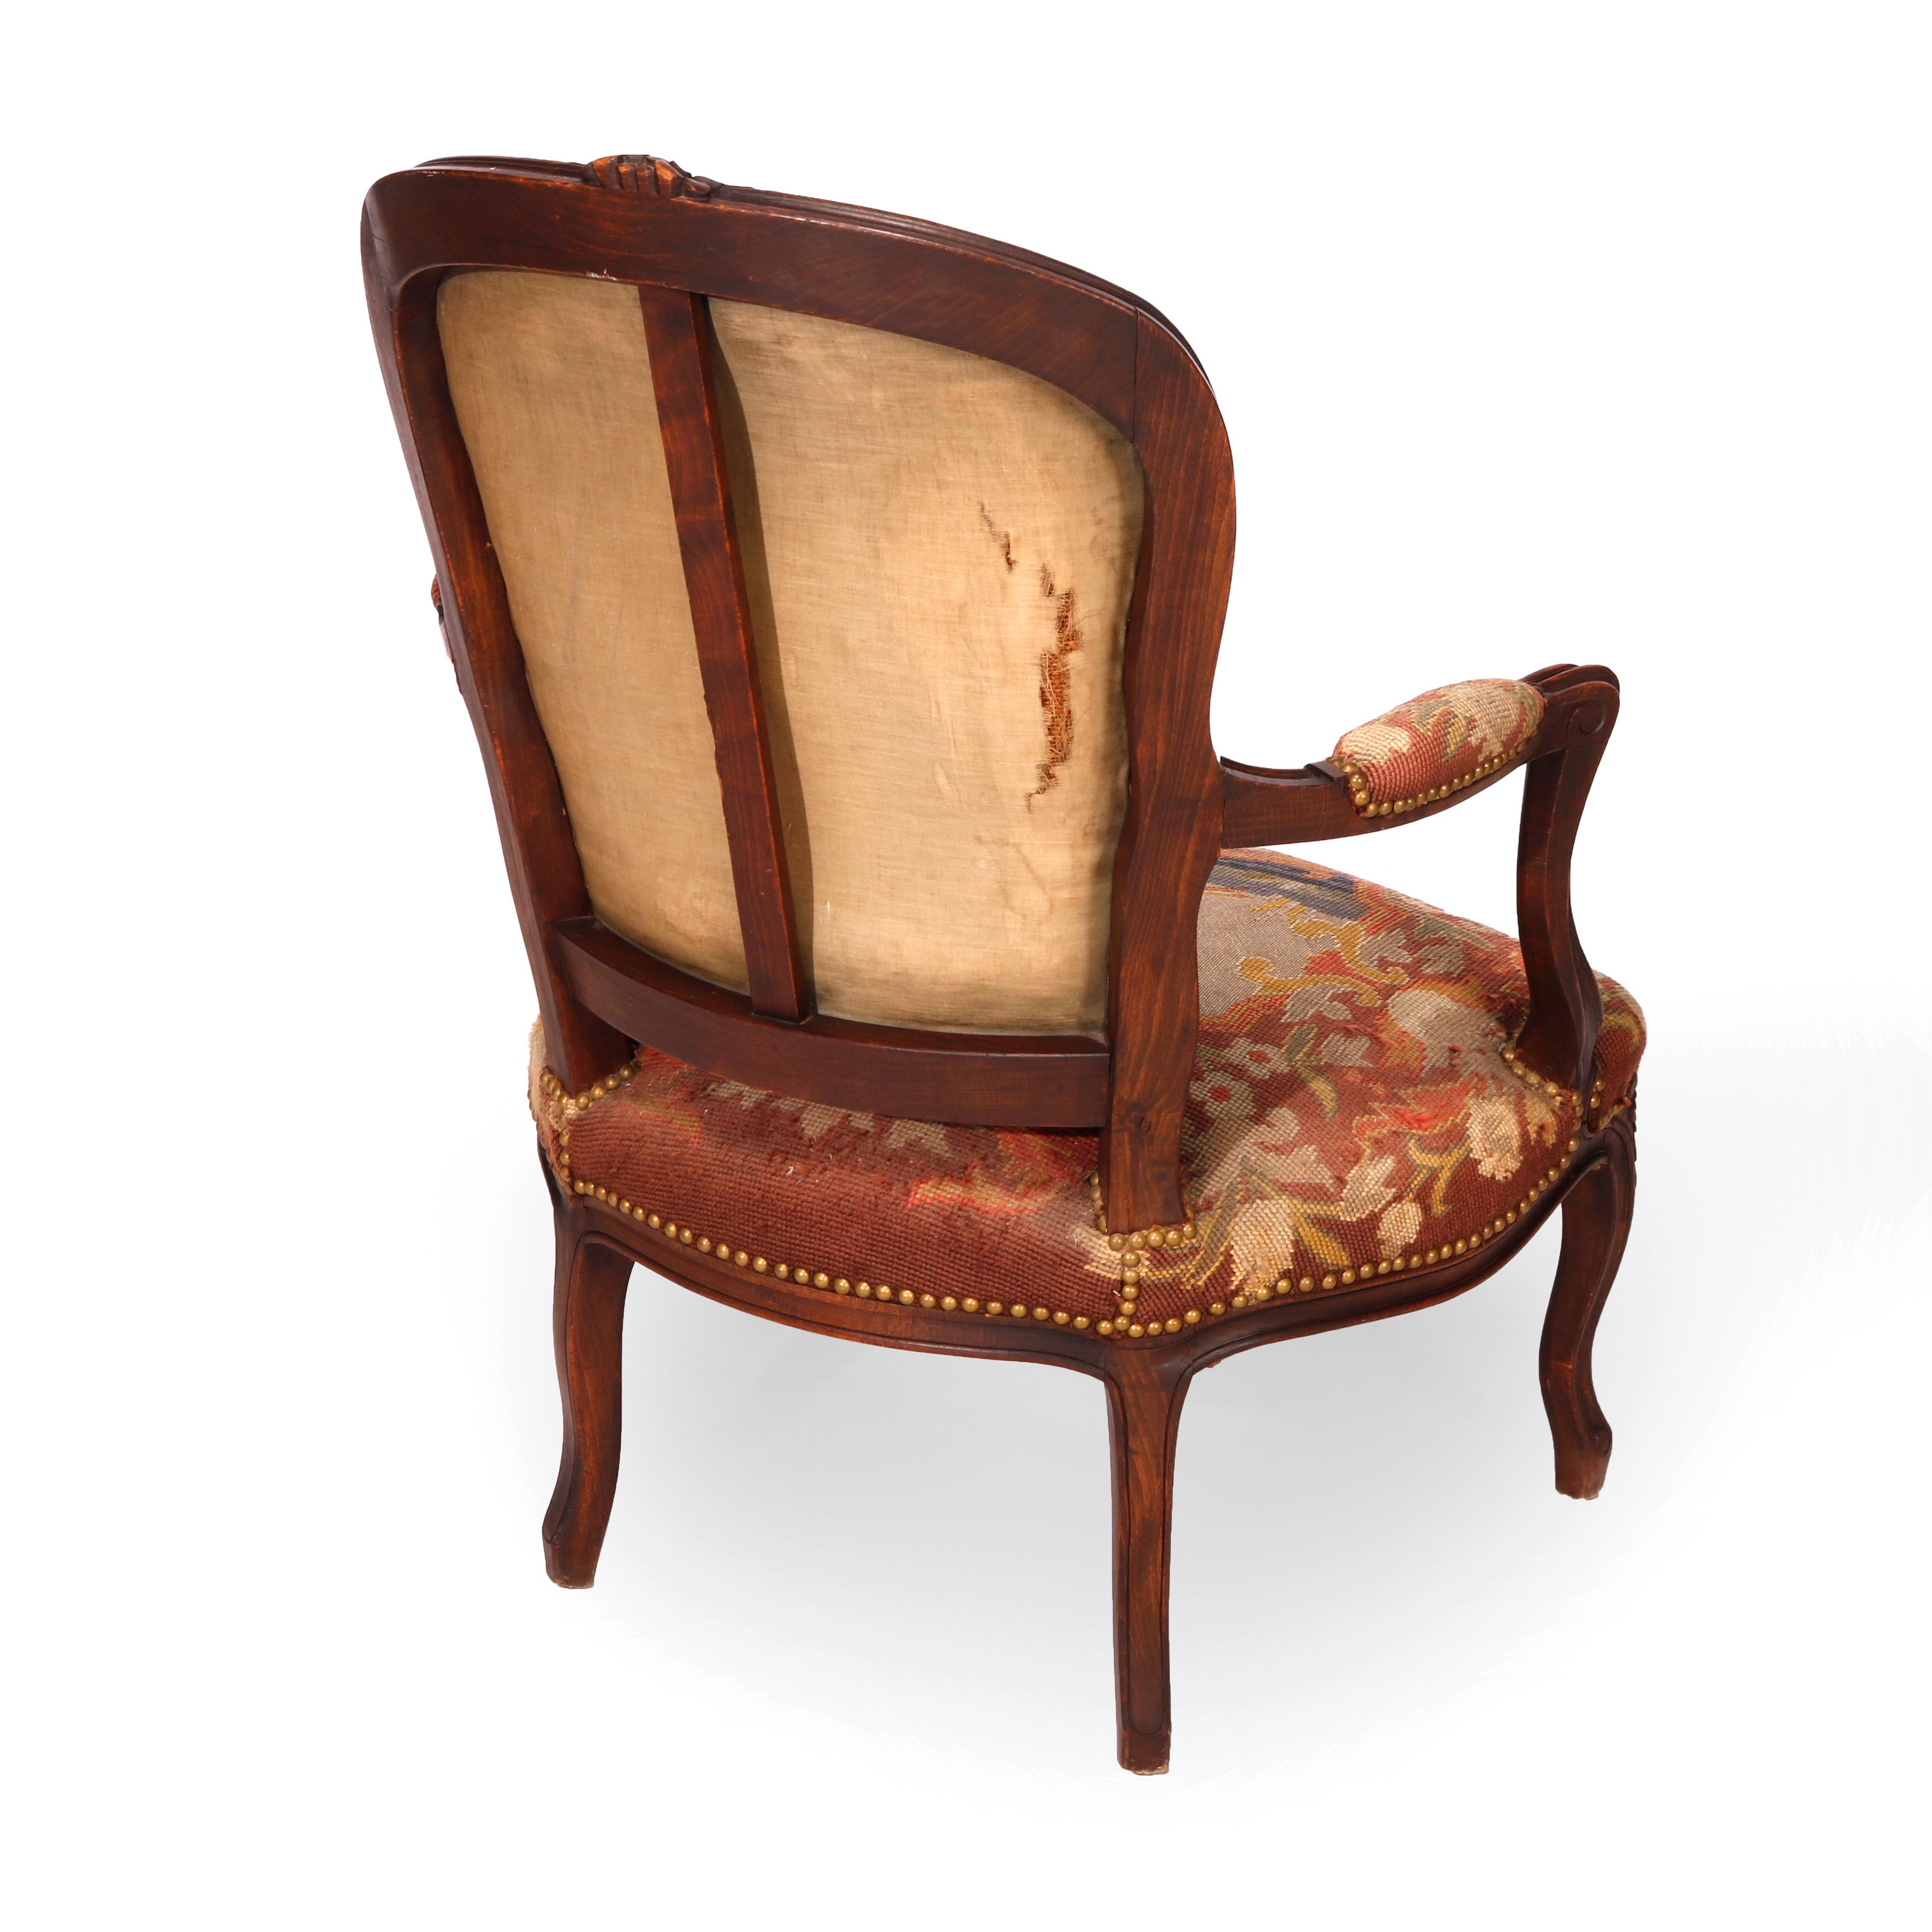 20th Century Antique French Louis XV Style Carved Walnut & Tapestry Arm Chair, Circa 1900